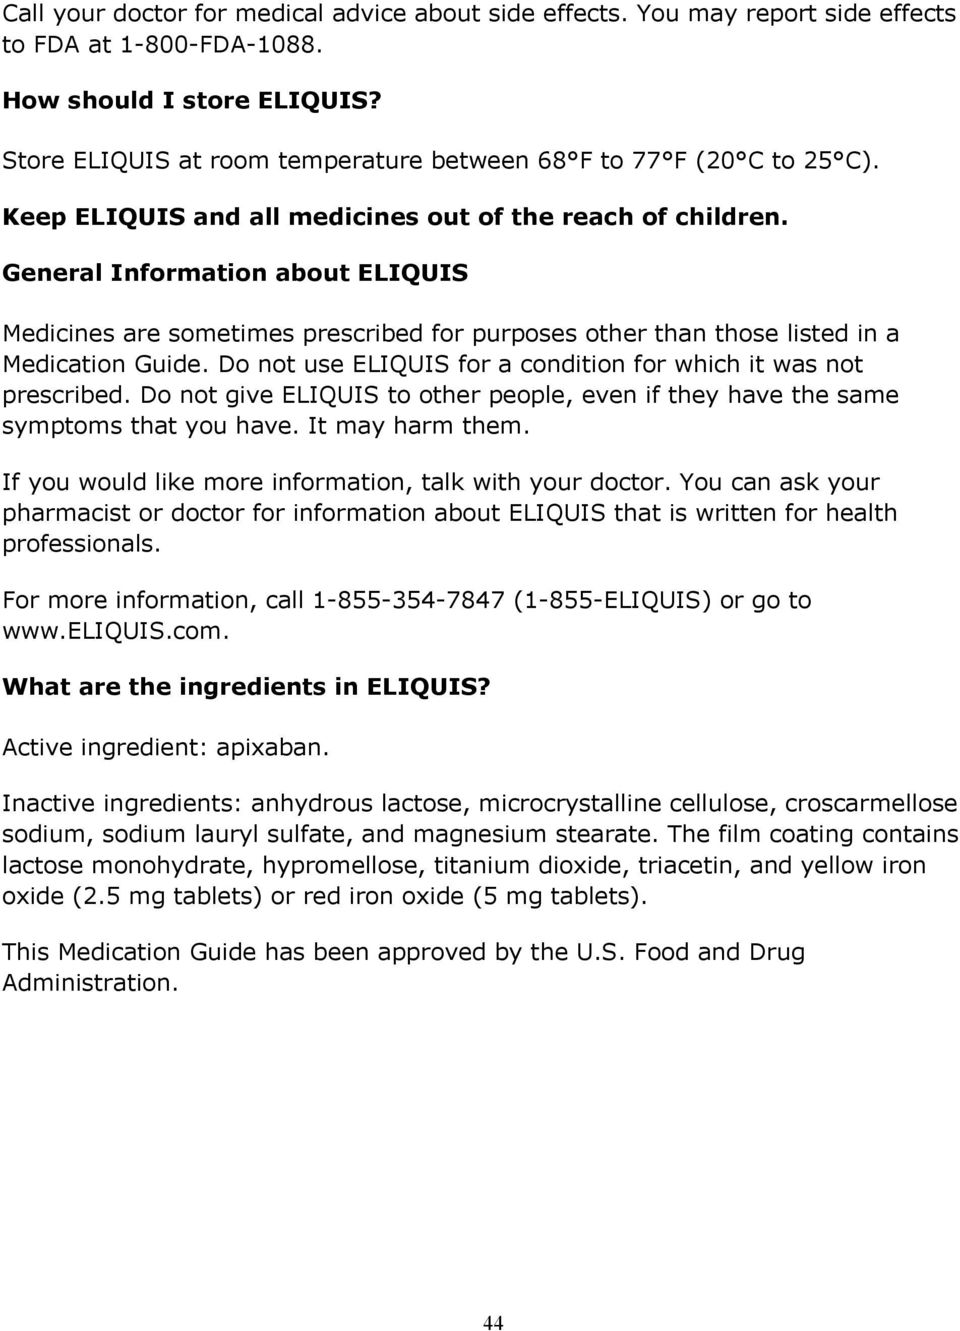 General Information about ELIQUIS Medicines are sometimes prescribed for purposes other than those listed in a Medication Guide. Do not use ELIQUIS for a condition for which it was not prescribed.